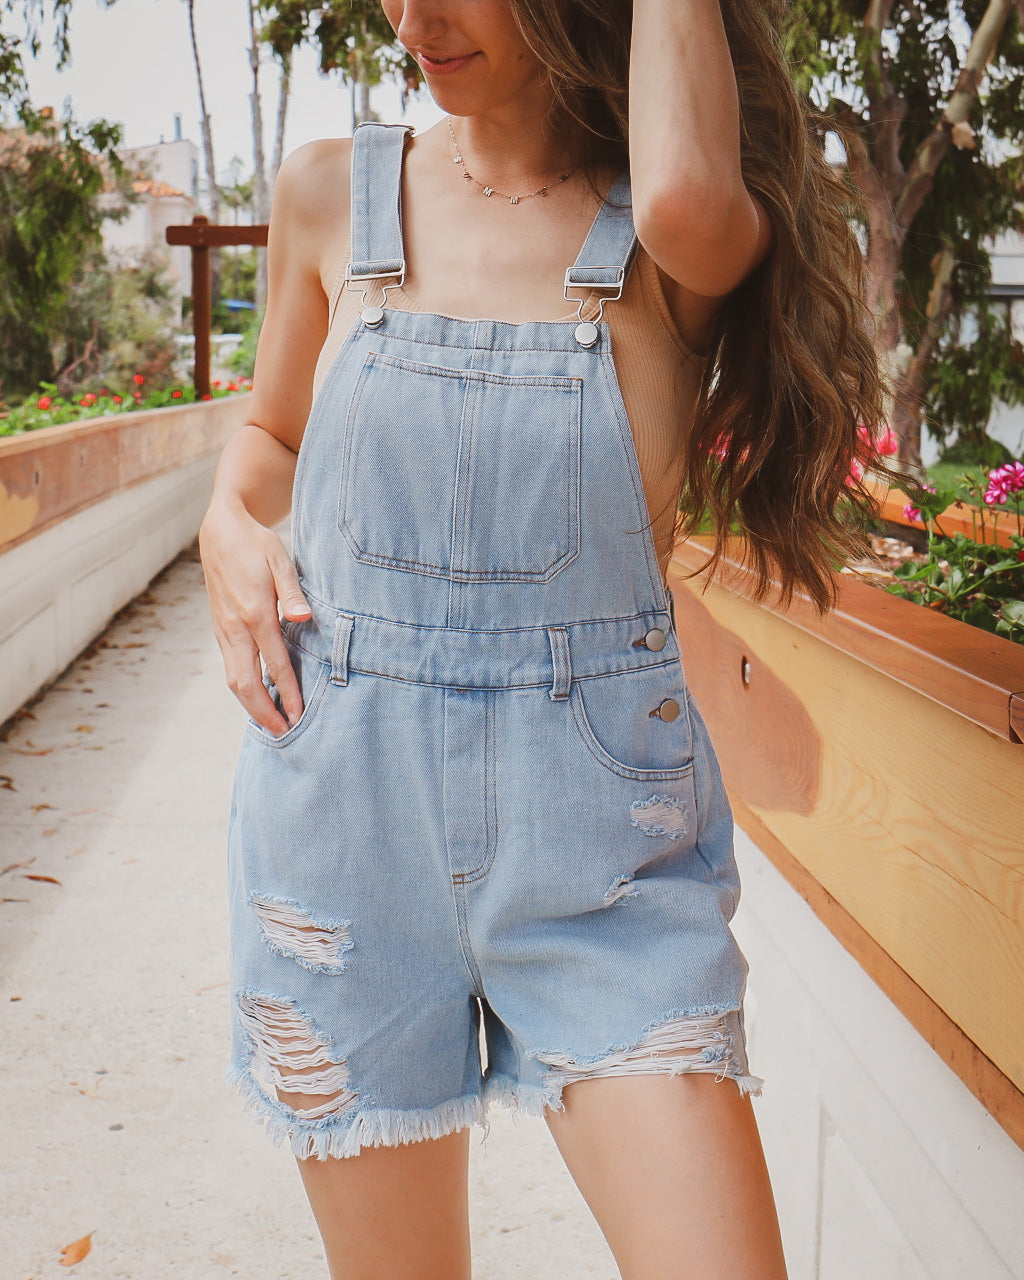 Tiffany Overalls in Light Wash